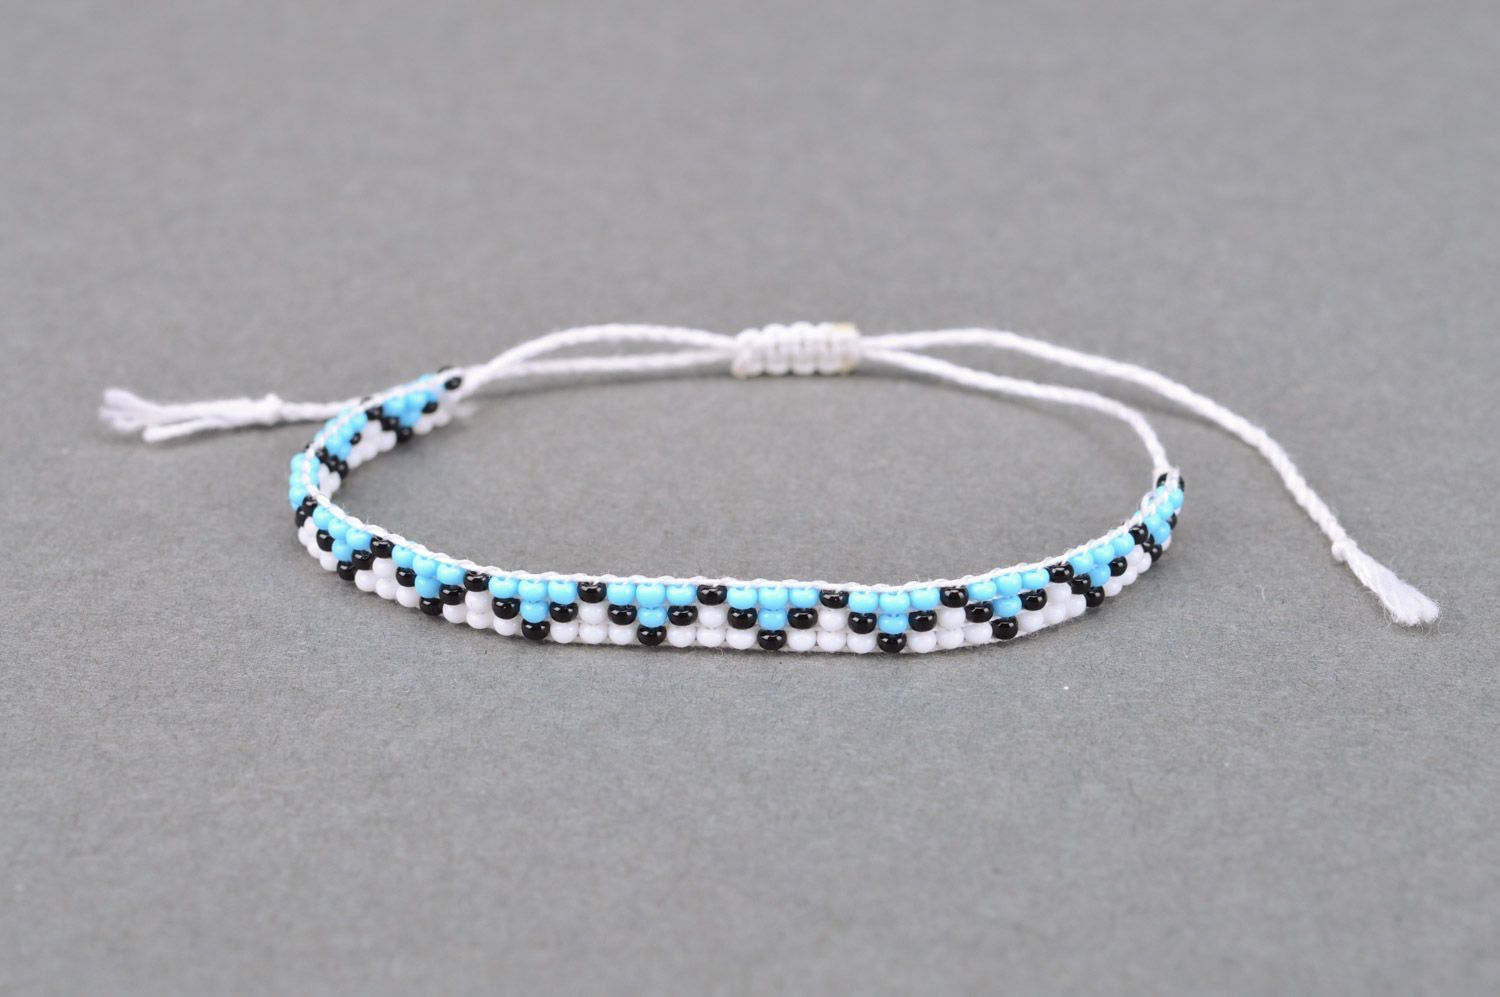 Handmade light thin wrist bracelet woven of beads and threads with ornament photo 2